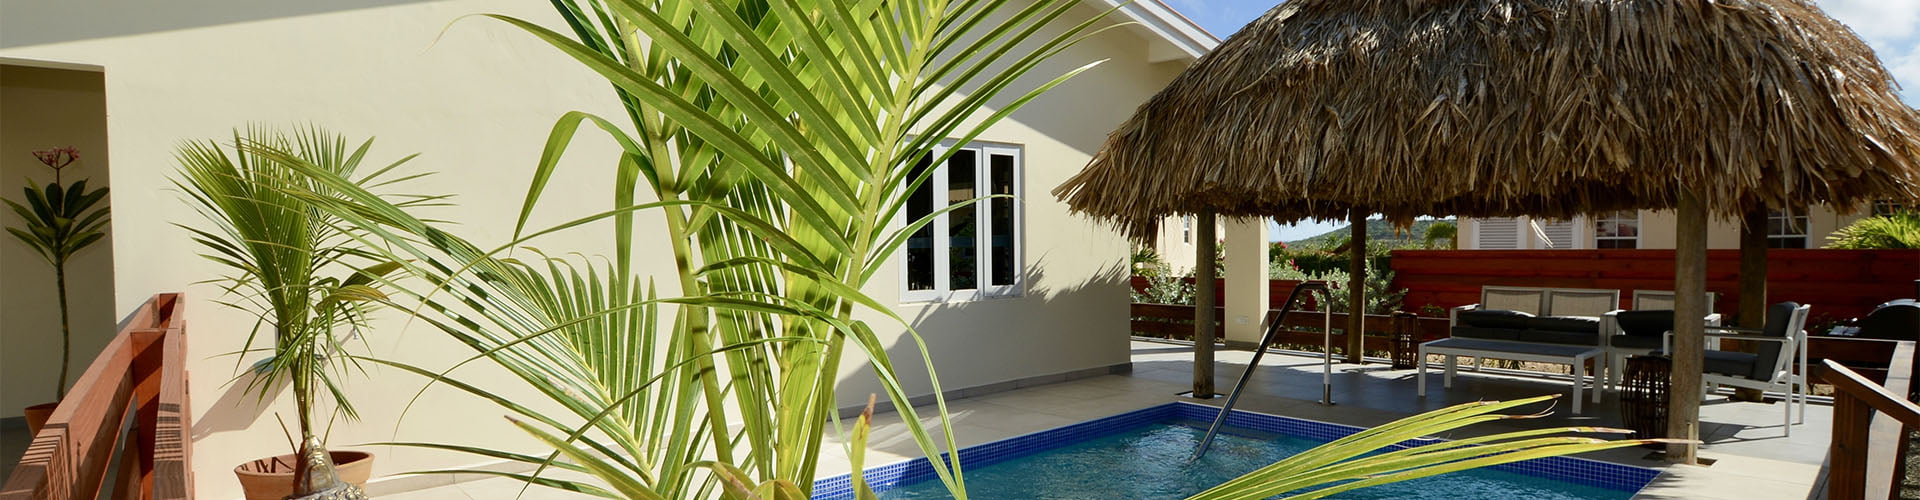 Rent a cheap villa with swimming pool on Curacao